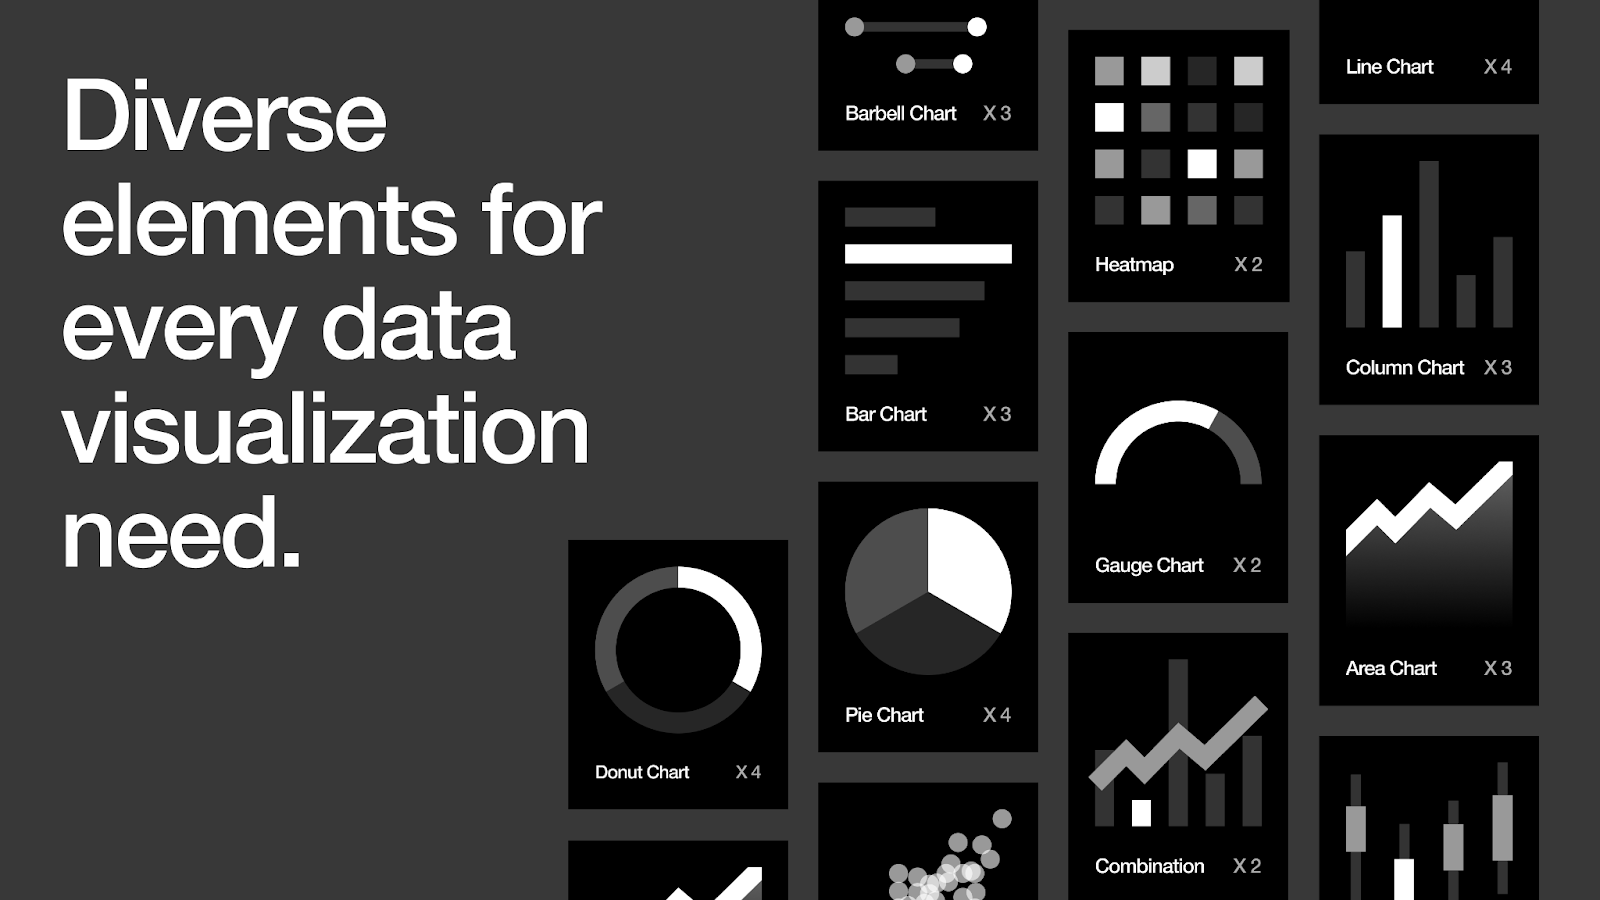 Image from the Advanced Data Visualization in Figma: Transforming Data Design article on Abduzeedo